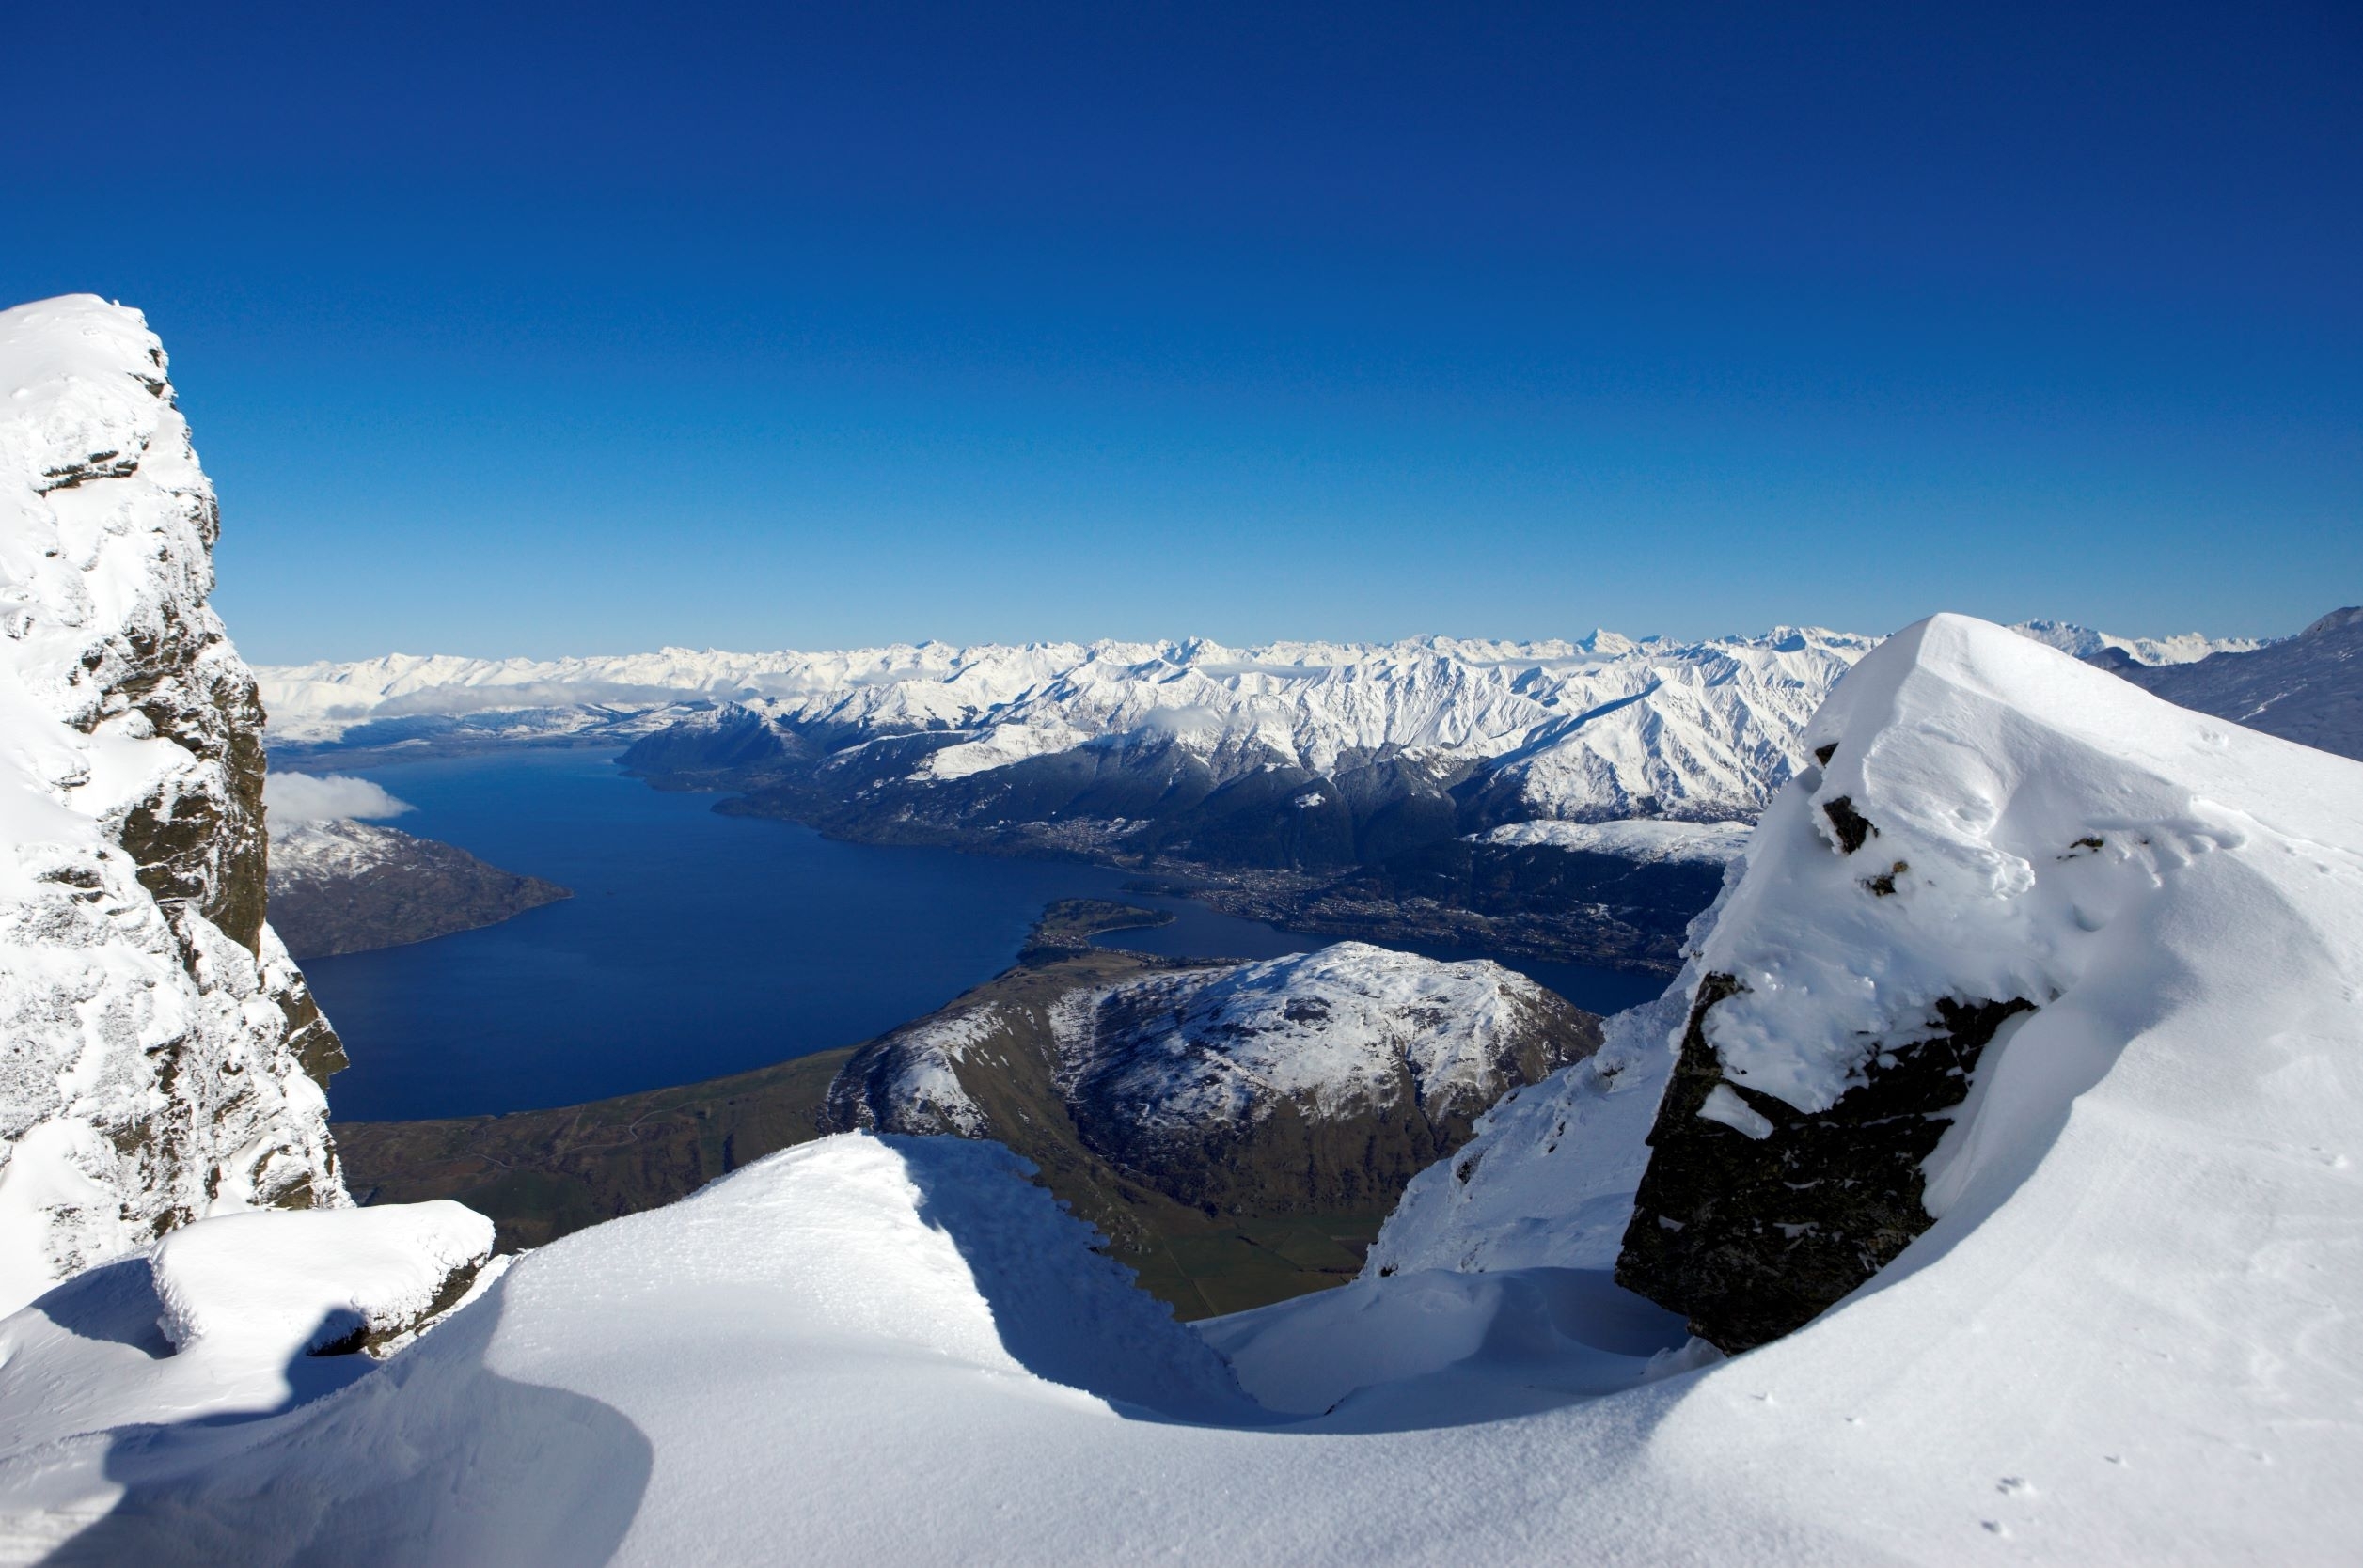 Best Ski Fields in Queenstown and Wanaka - The Remarkables